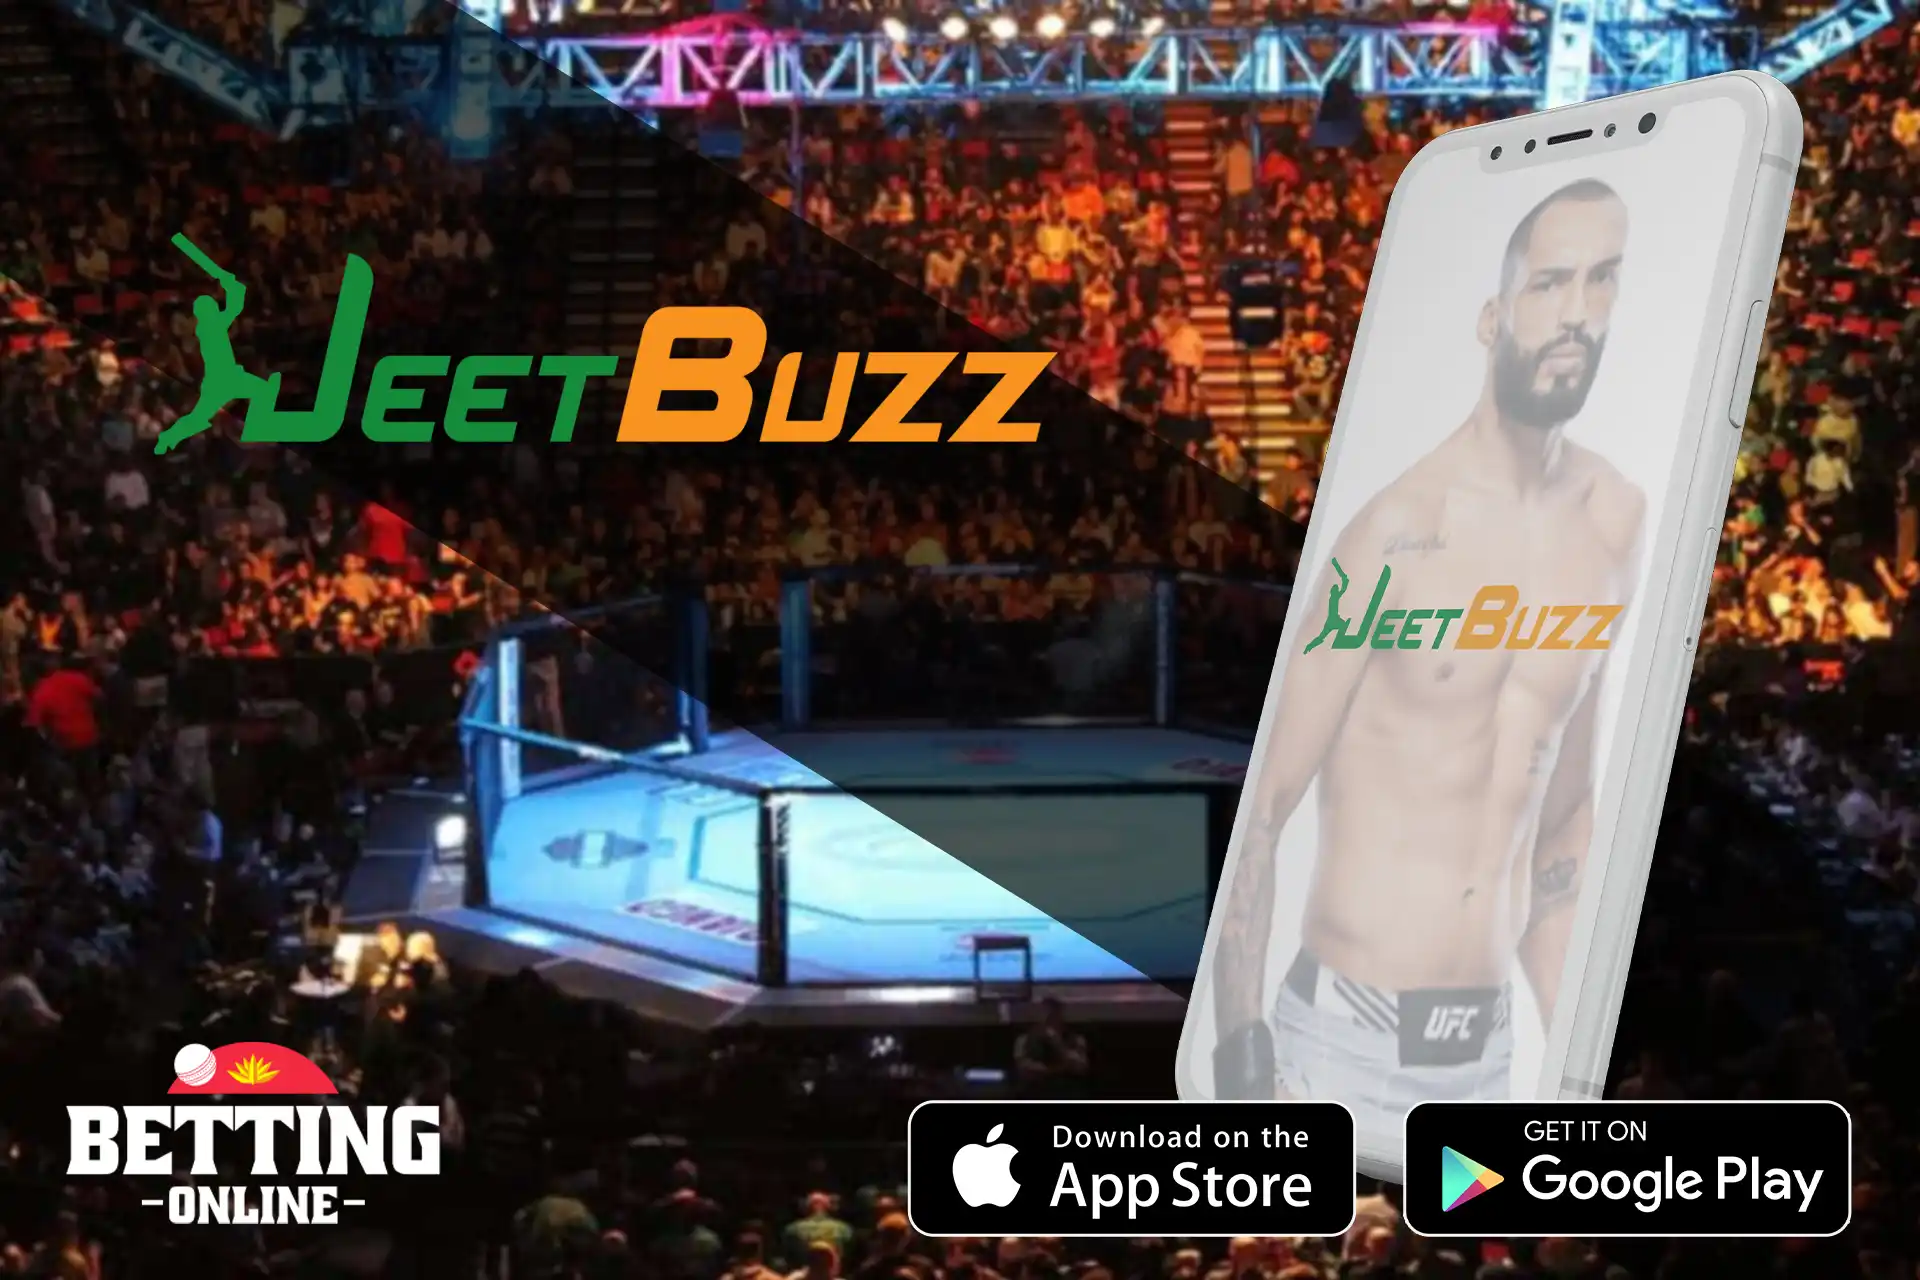 Place your bets at JeetBuzz on all the UFC fights that will take place in the near future.